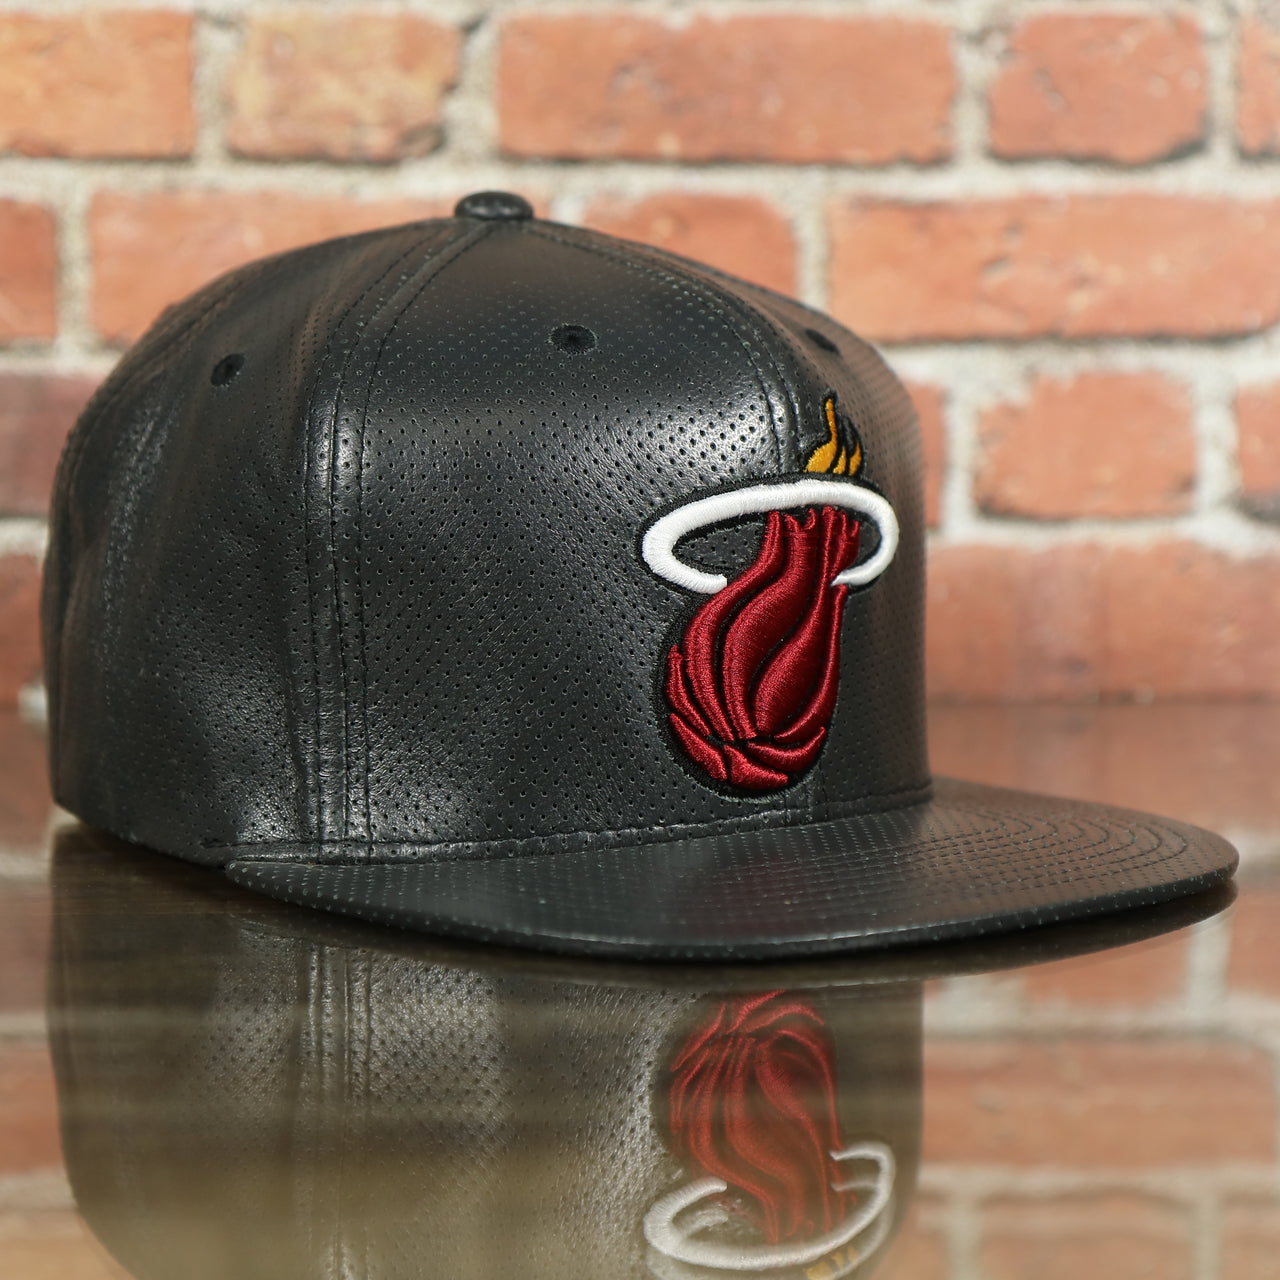 Miami Heat Perforated Leather Snapback | Black Miami Heat Snap Back with Racing Leather